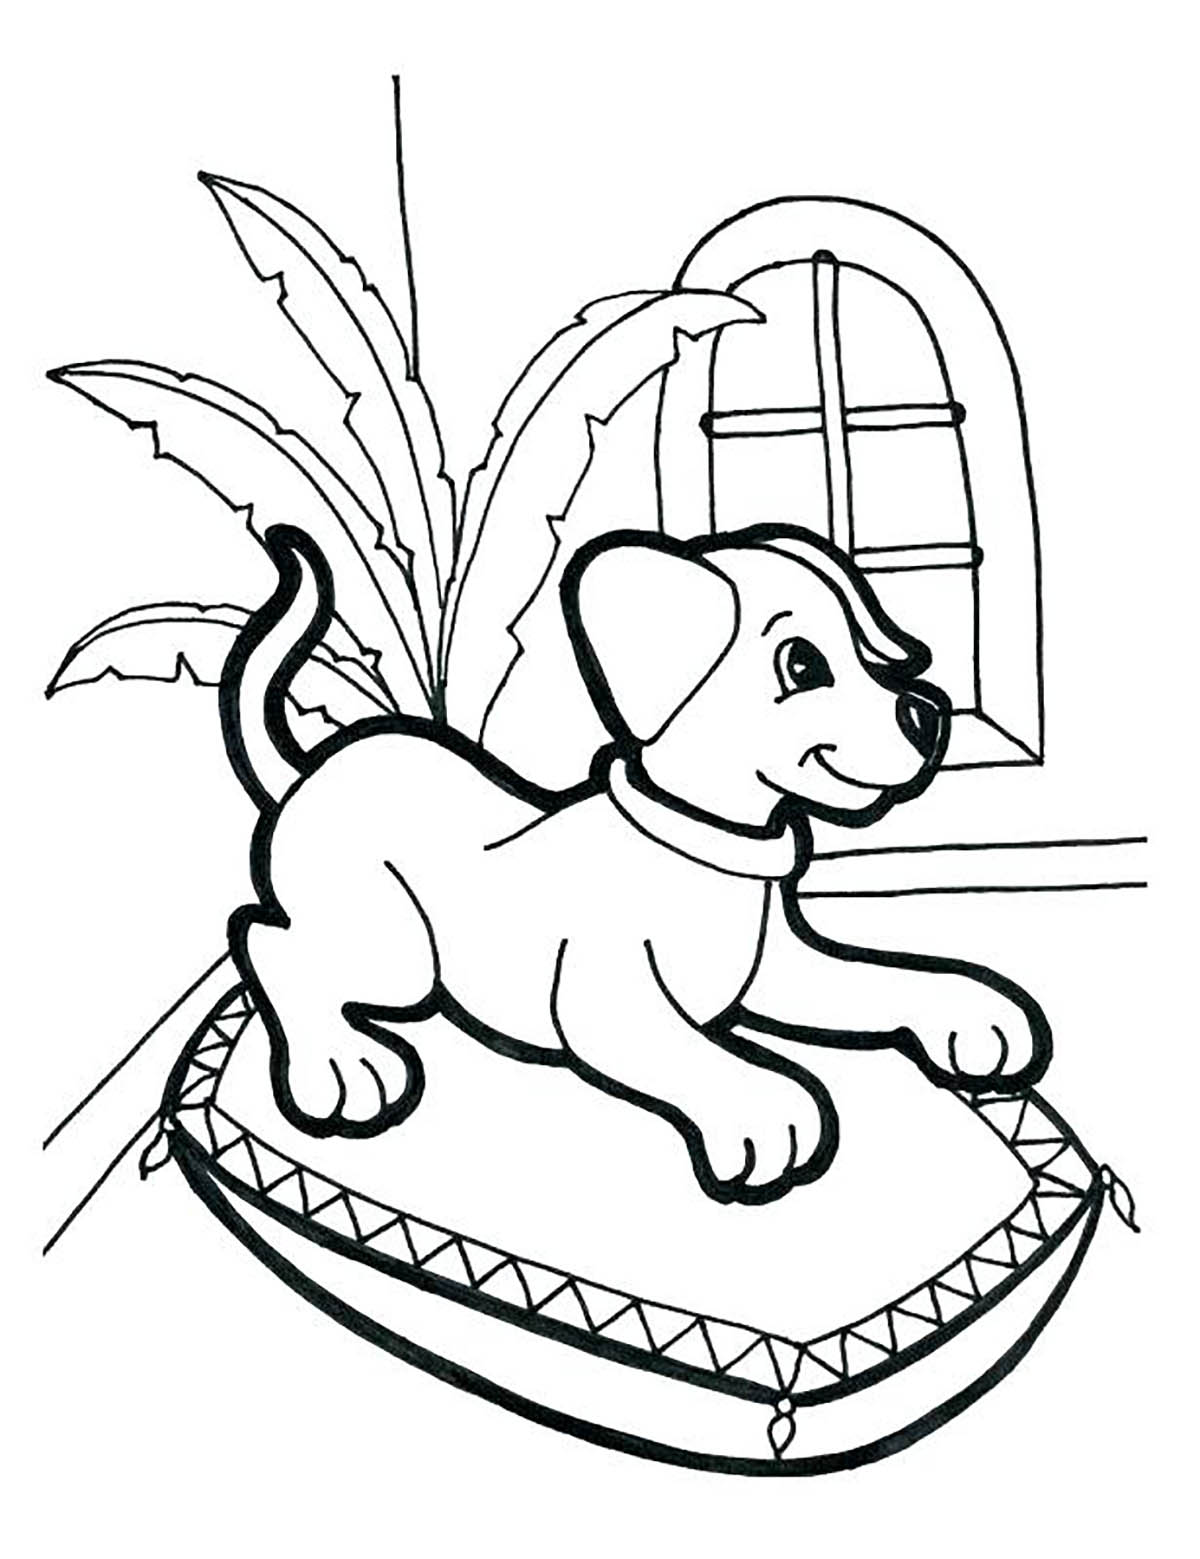 Dog in the basket - Dogs Kids Coloring Pages